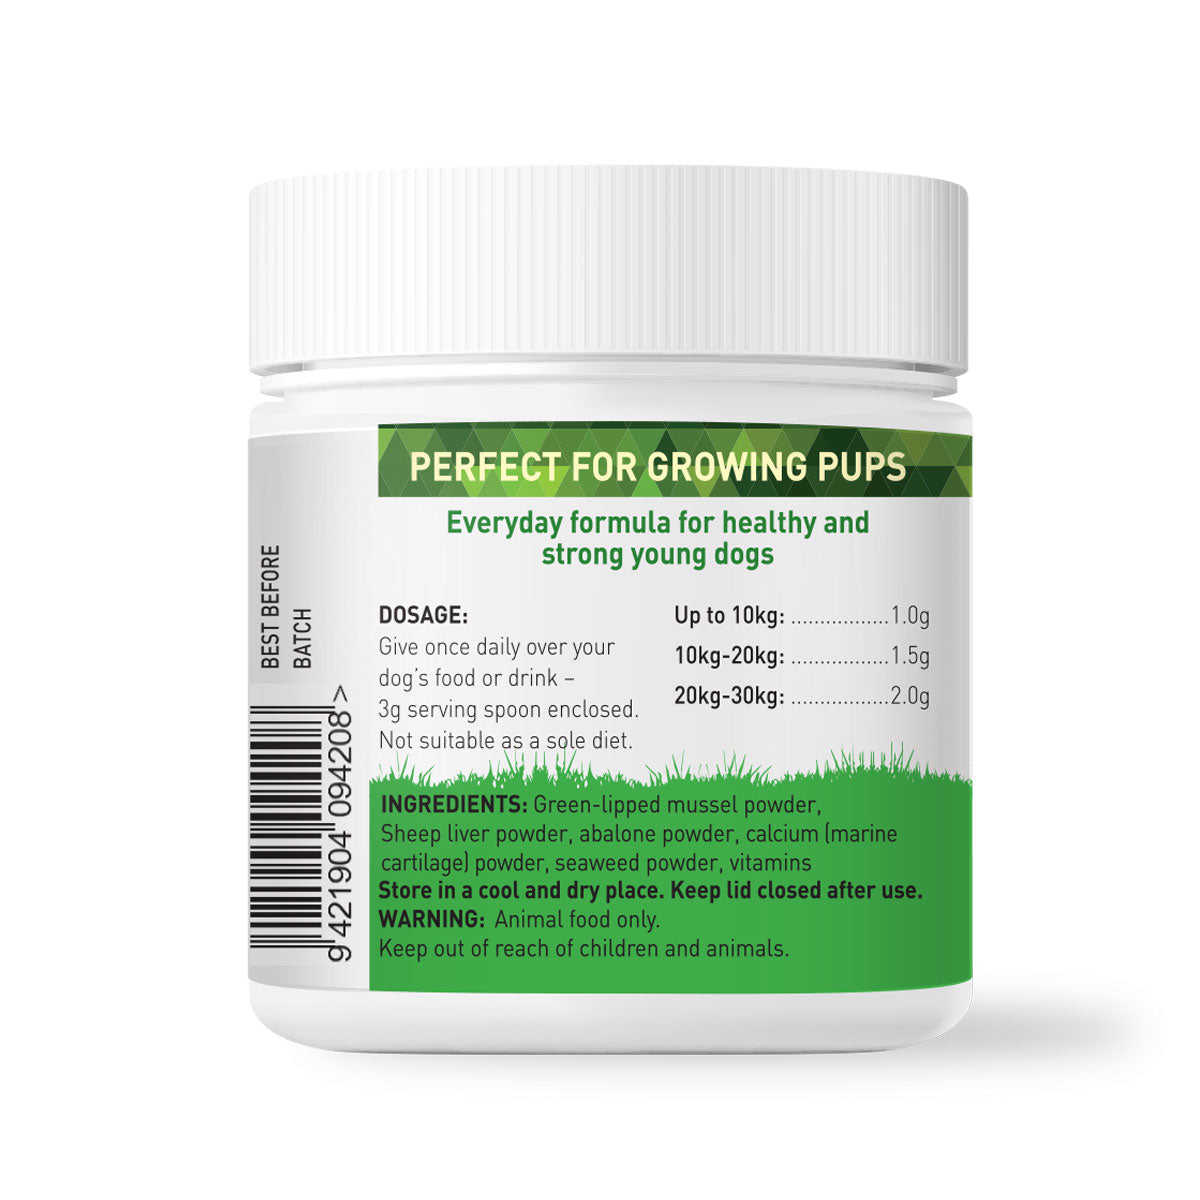 Nutreats puppy prime nutritional supplement powder for puppies and young dogs. 100% natural and sustainably sourced. 